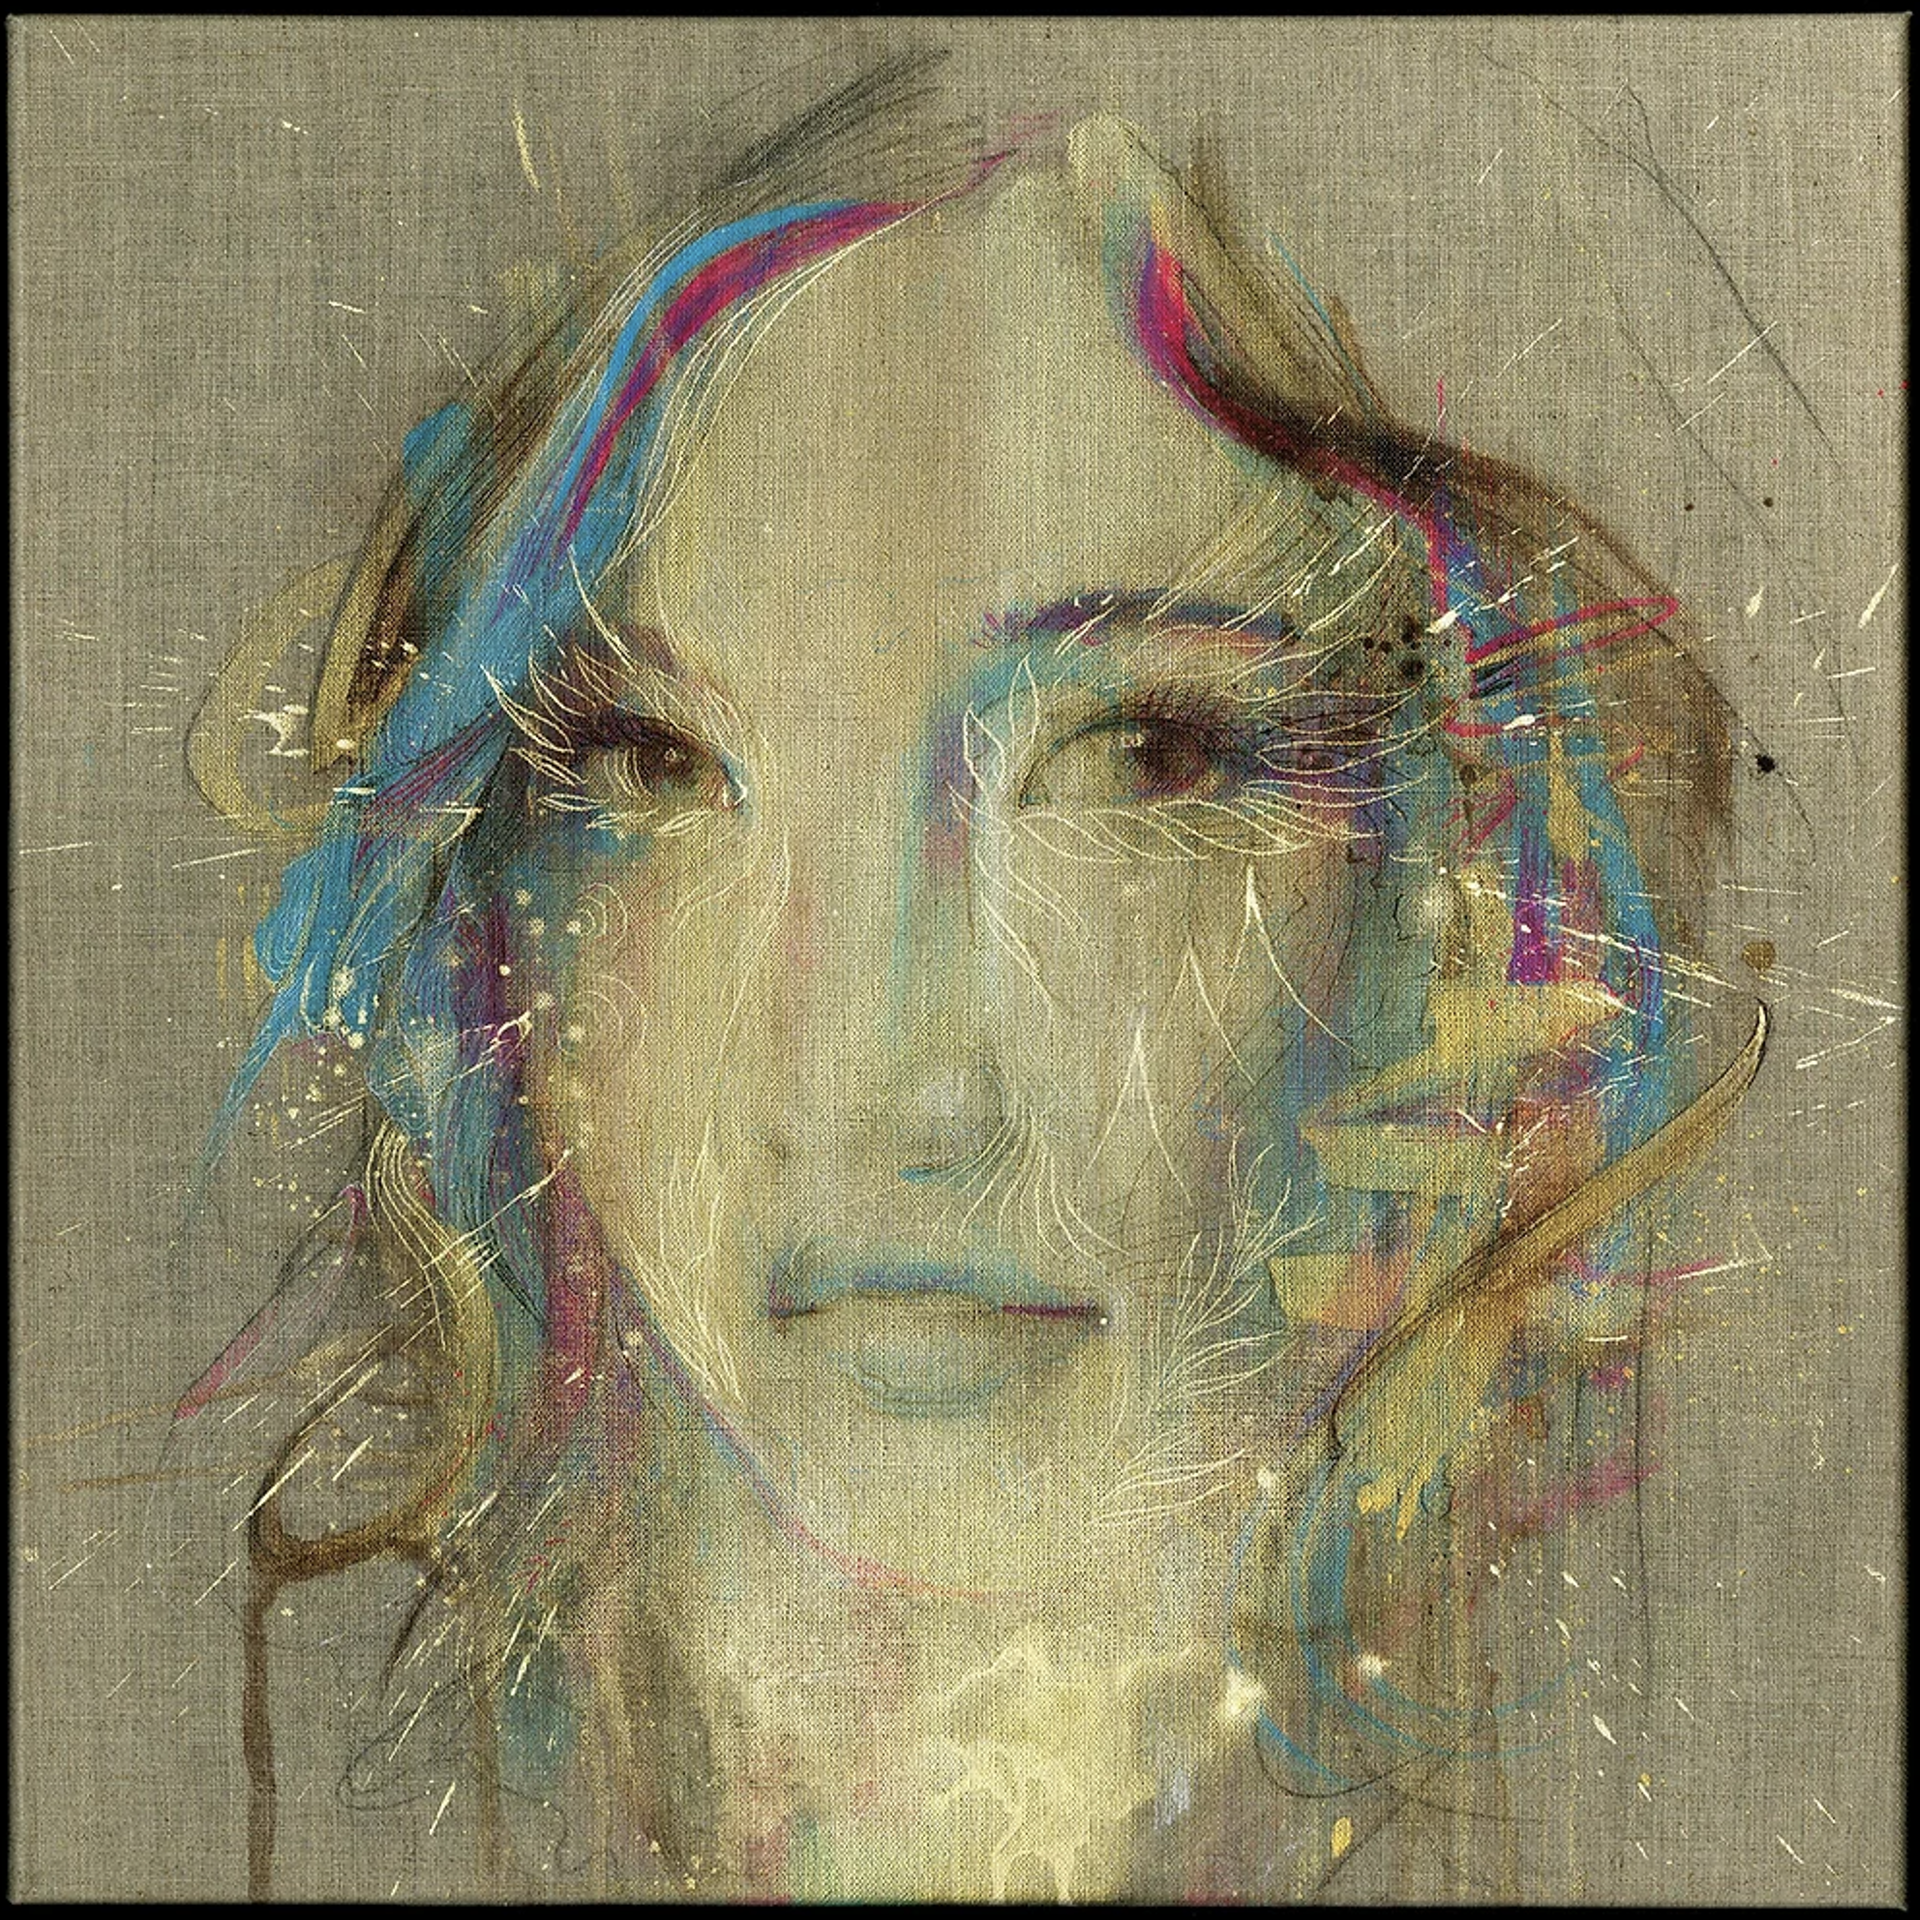 Putting The Pieces Back Together by Carne Griffiths